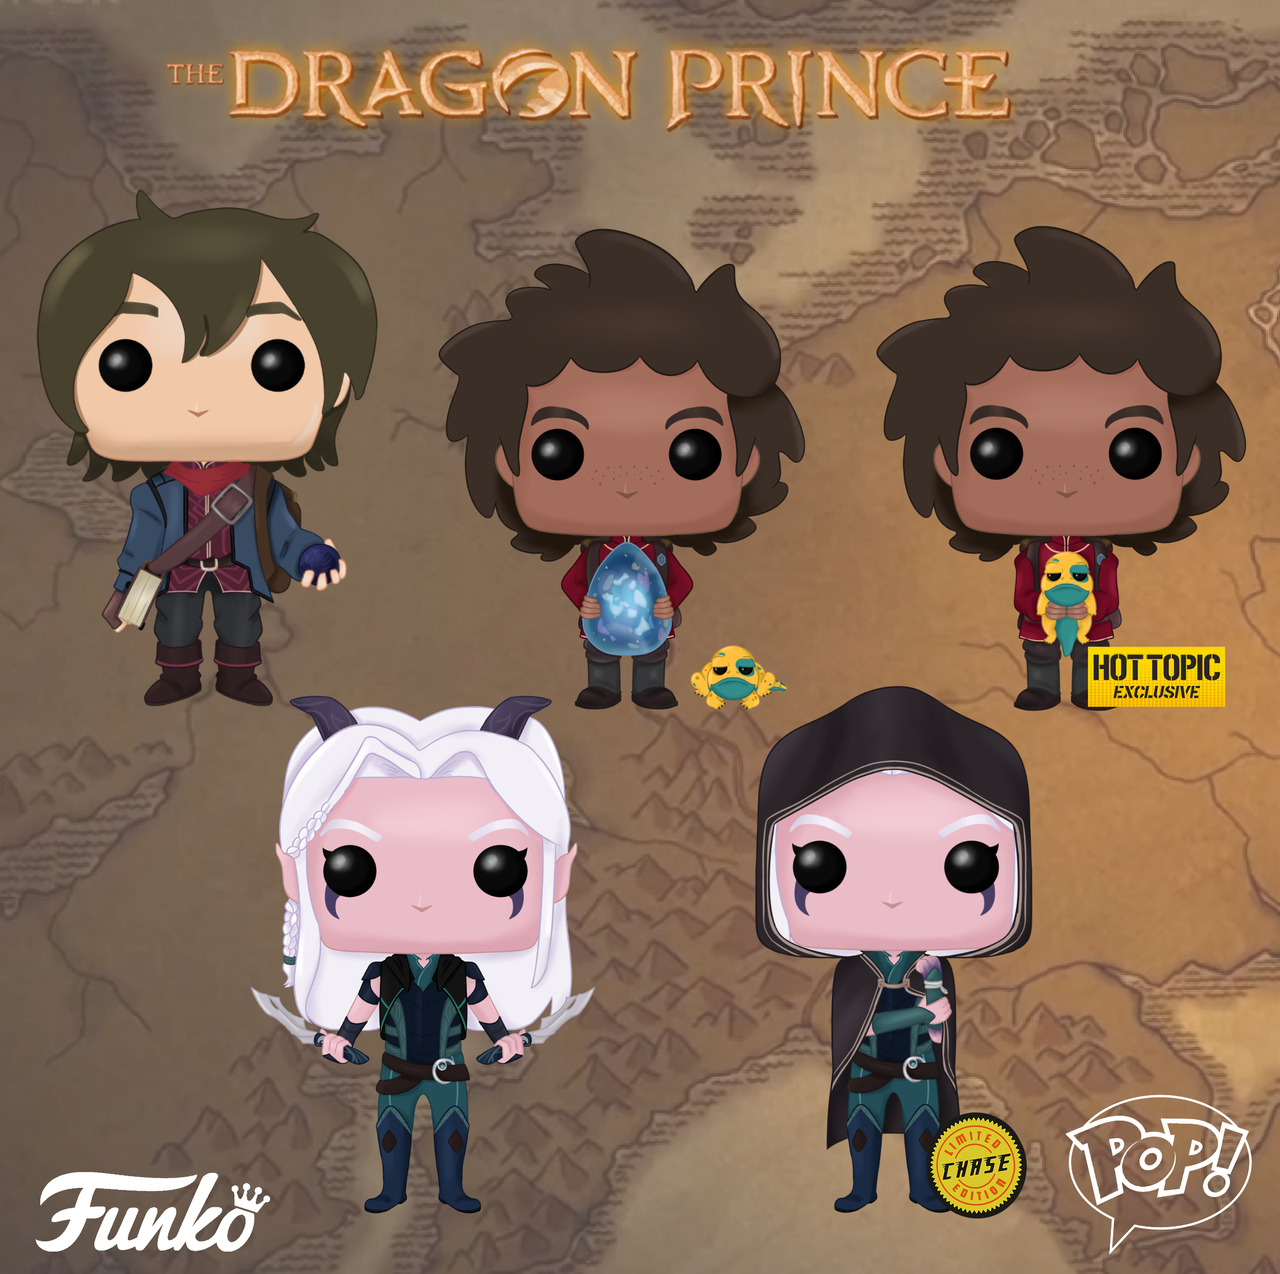 Knorretje hop Desillusie The Dragon Prince — aikeji: New Funko POPs from “The Dragon Prince”! ...